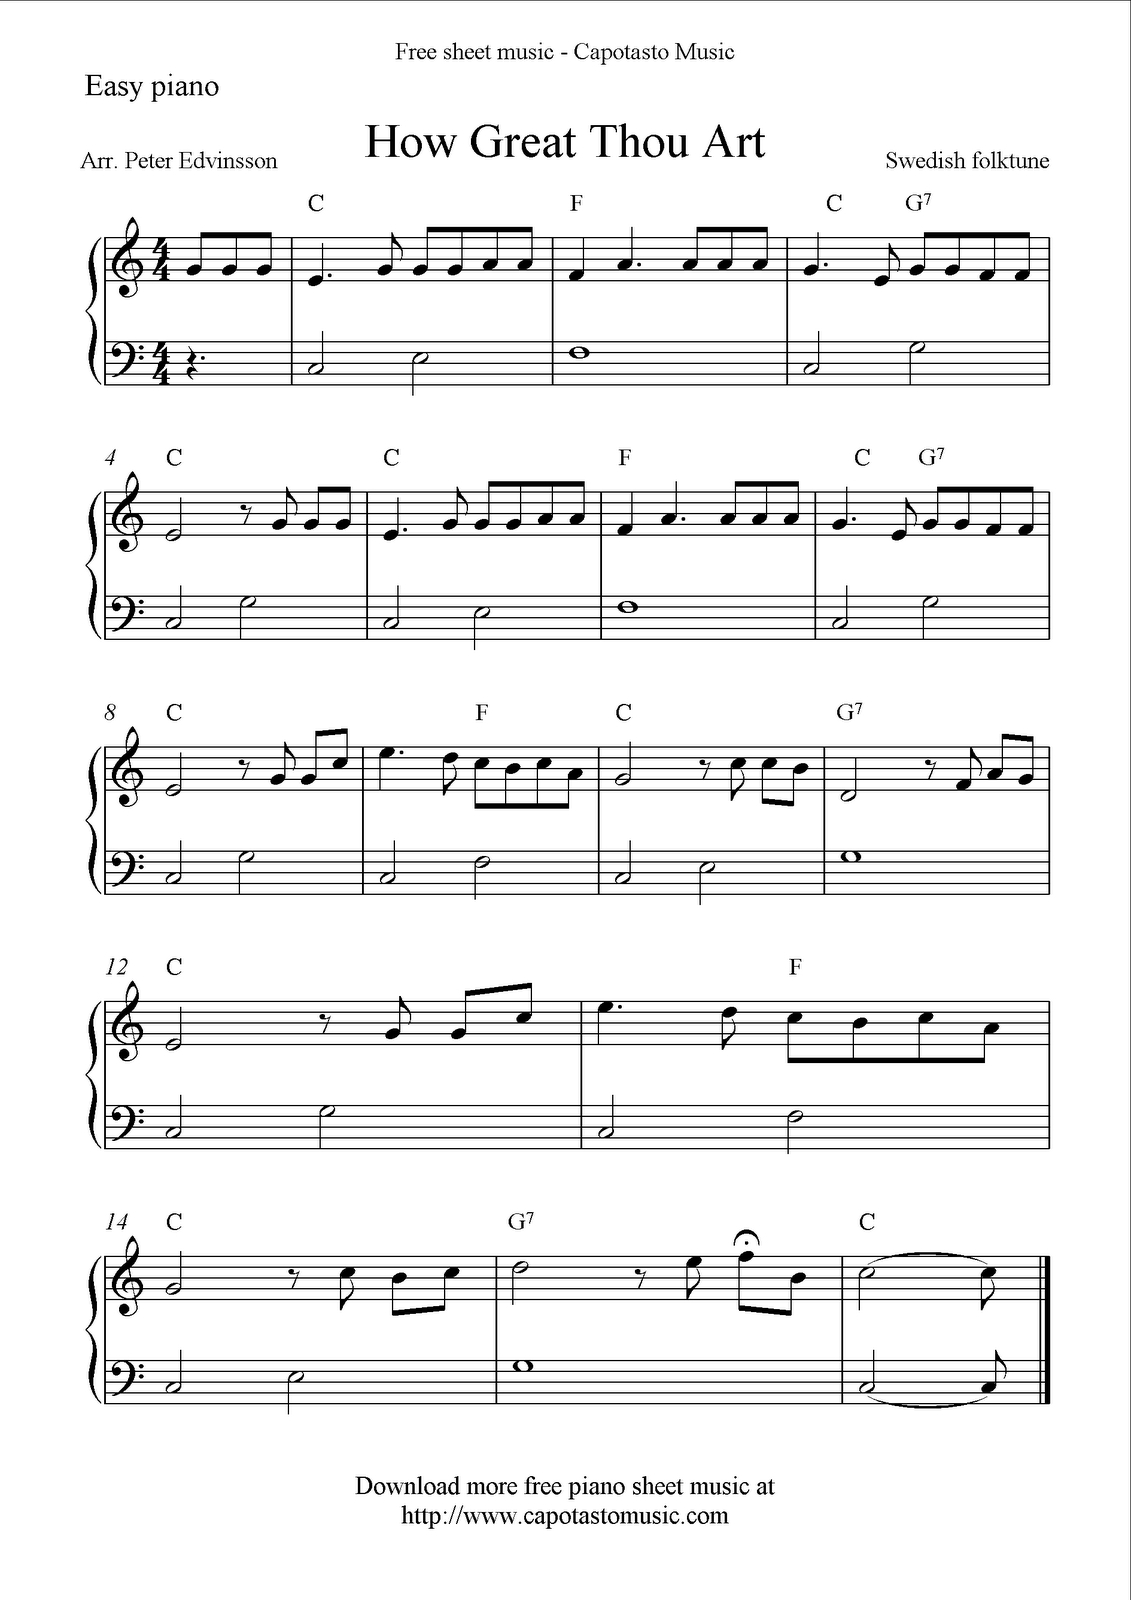 Free Sheet Music Pages &amp;amp; Guitar Lessons | Orchestra | Pinterest - Piano Sheet Music For Beginners Popular Songs Free Printable